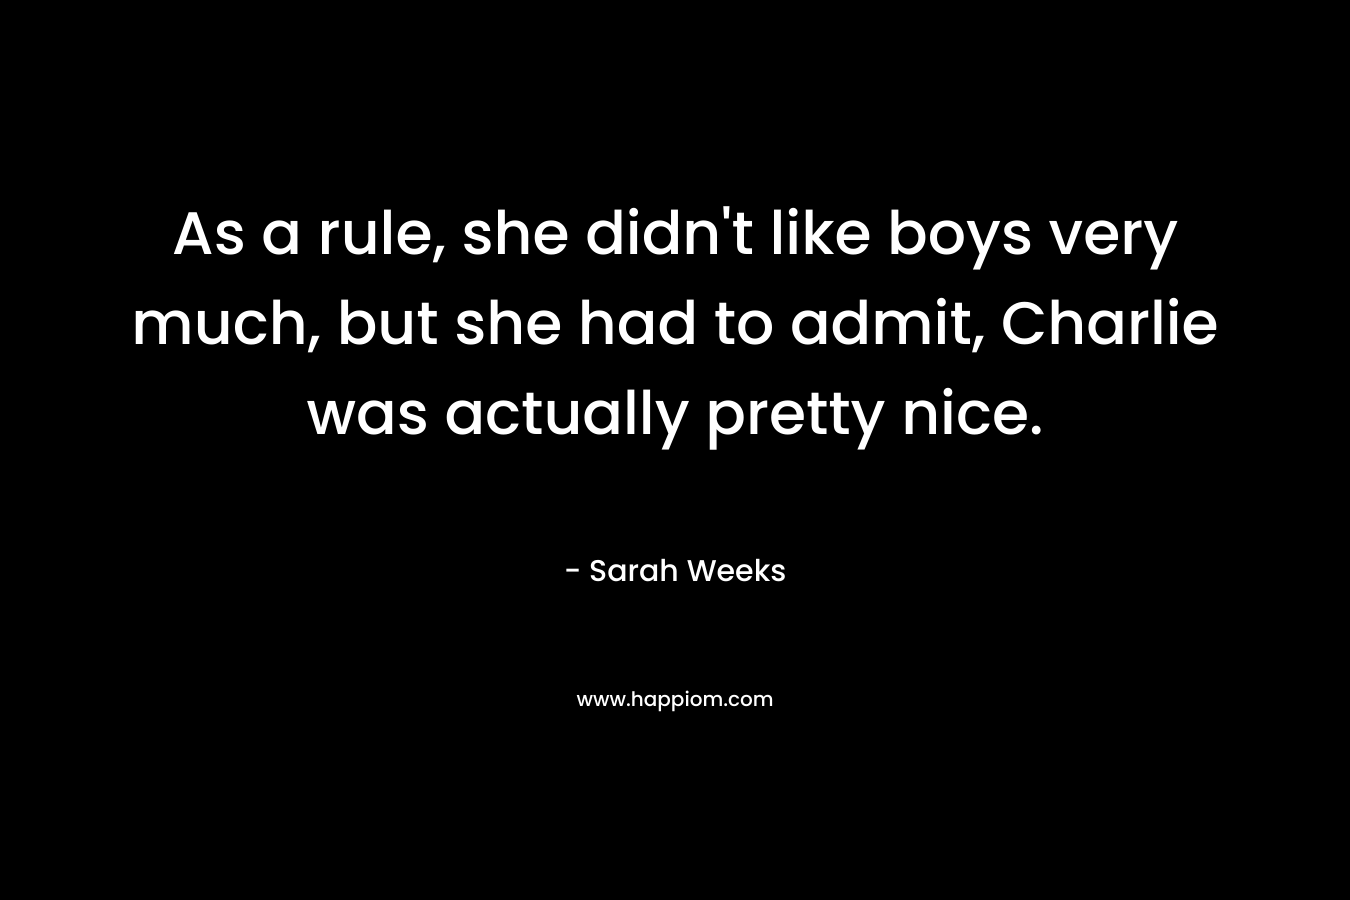 As a rule, she didn't like boys very much, but she had to admit, Charlie was actually pretty nice.